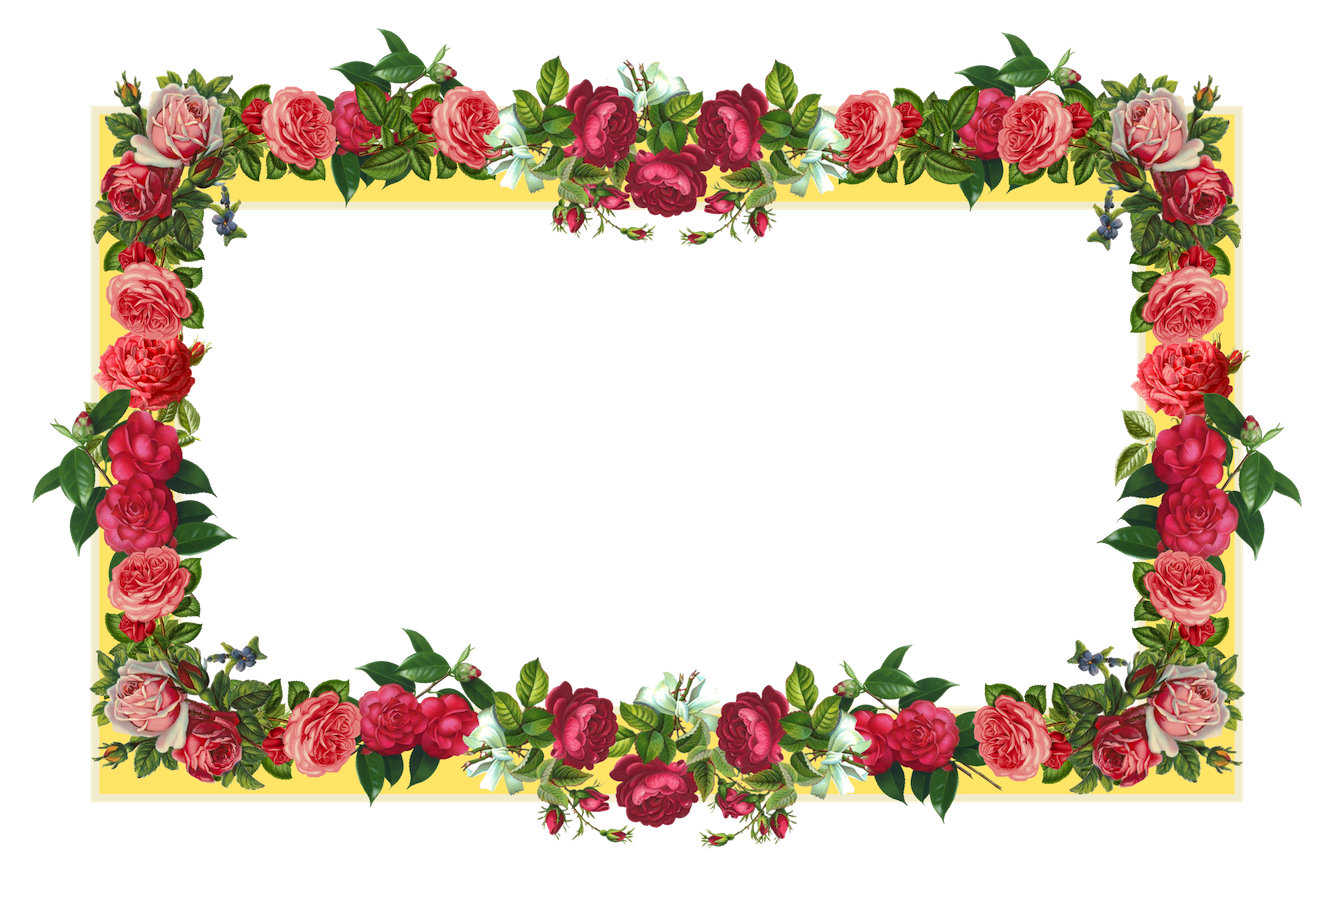 Red Rose Border Design | AutoReview 2016